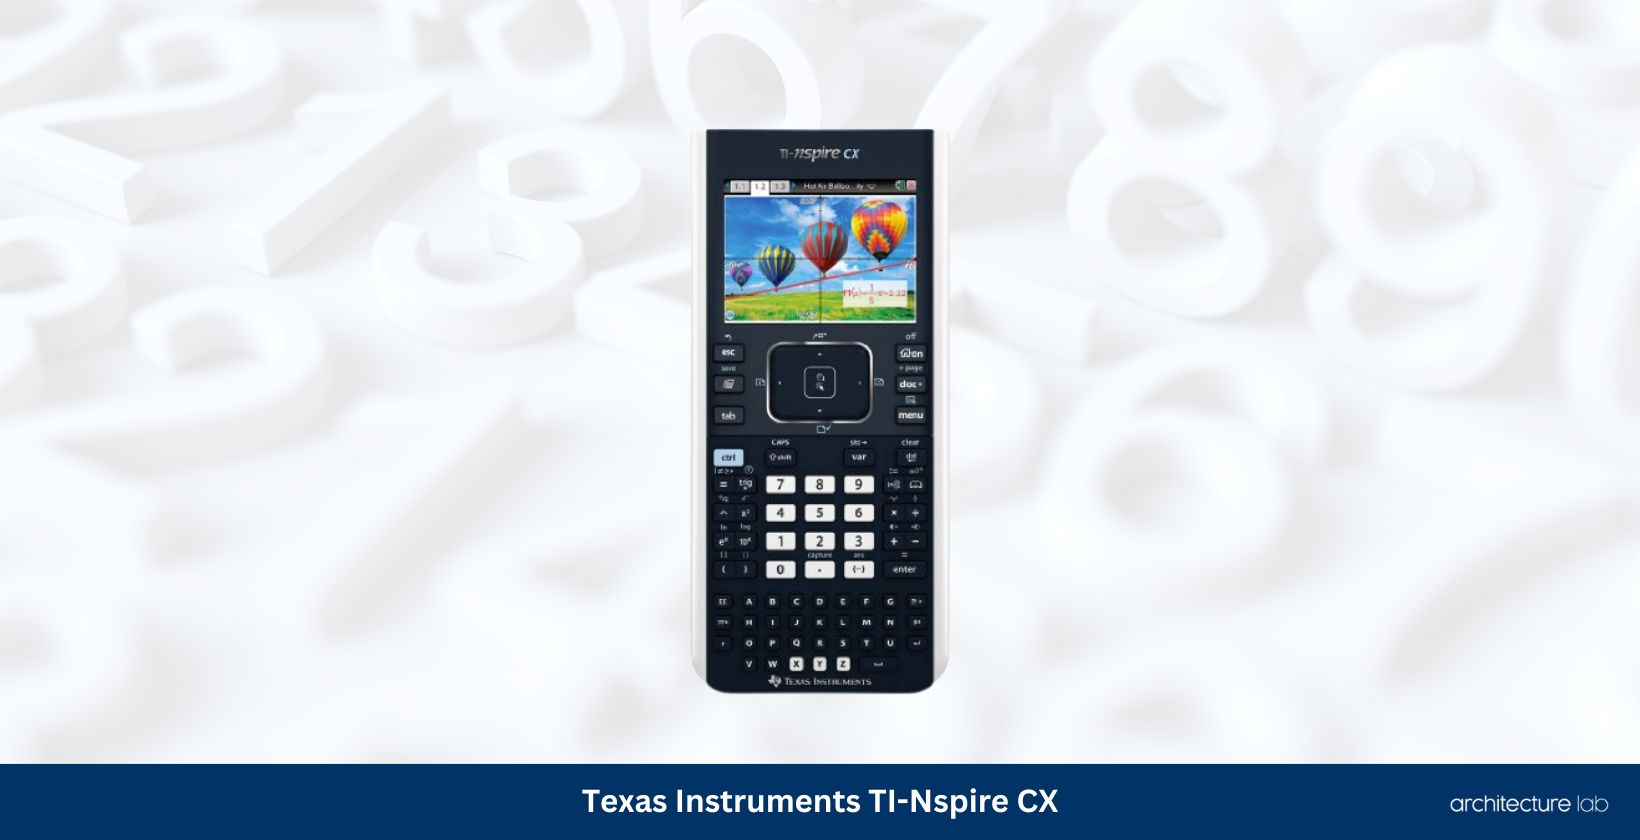 Texas instruments ti nspire cx graphing calculator